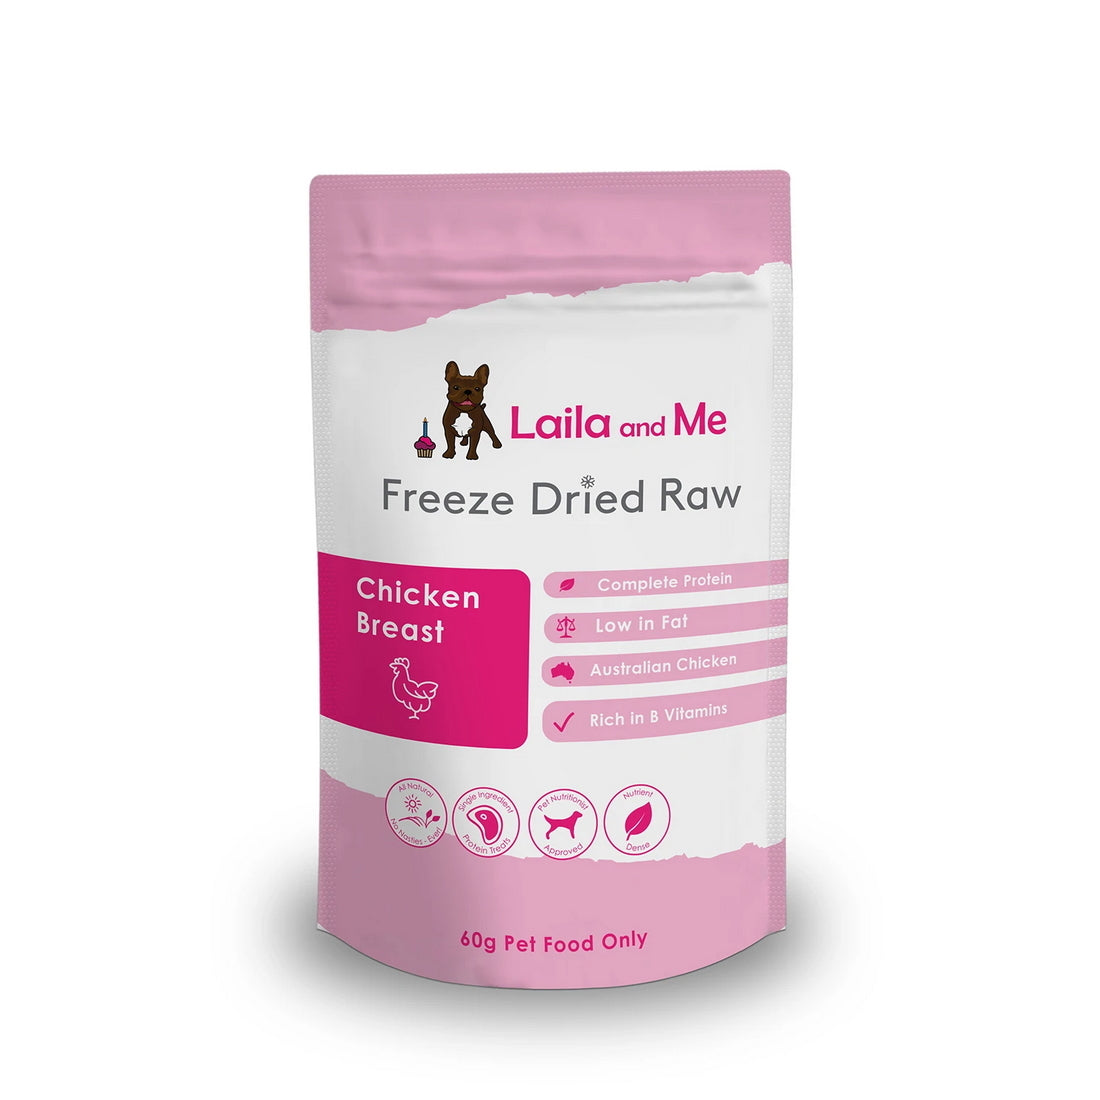 Laila & Me Freeze Dried Raw Chicken Breast For Dogs & Cats Treat